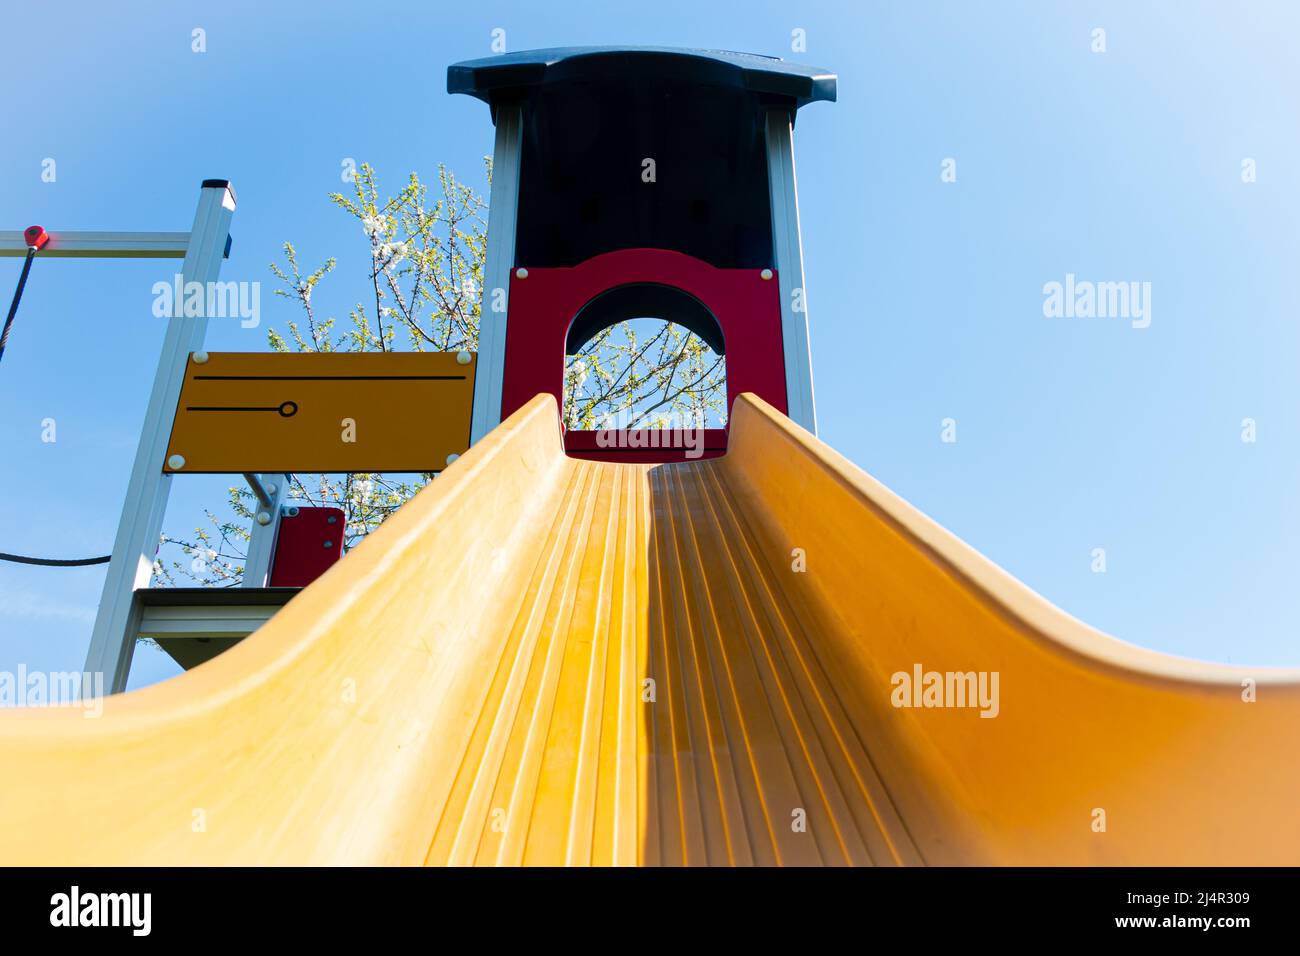 Brightly colored yellow playset with a slide and climbing frame in a playground for children who play Stock Photo